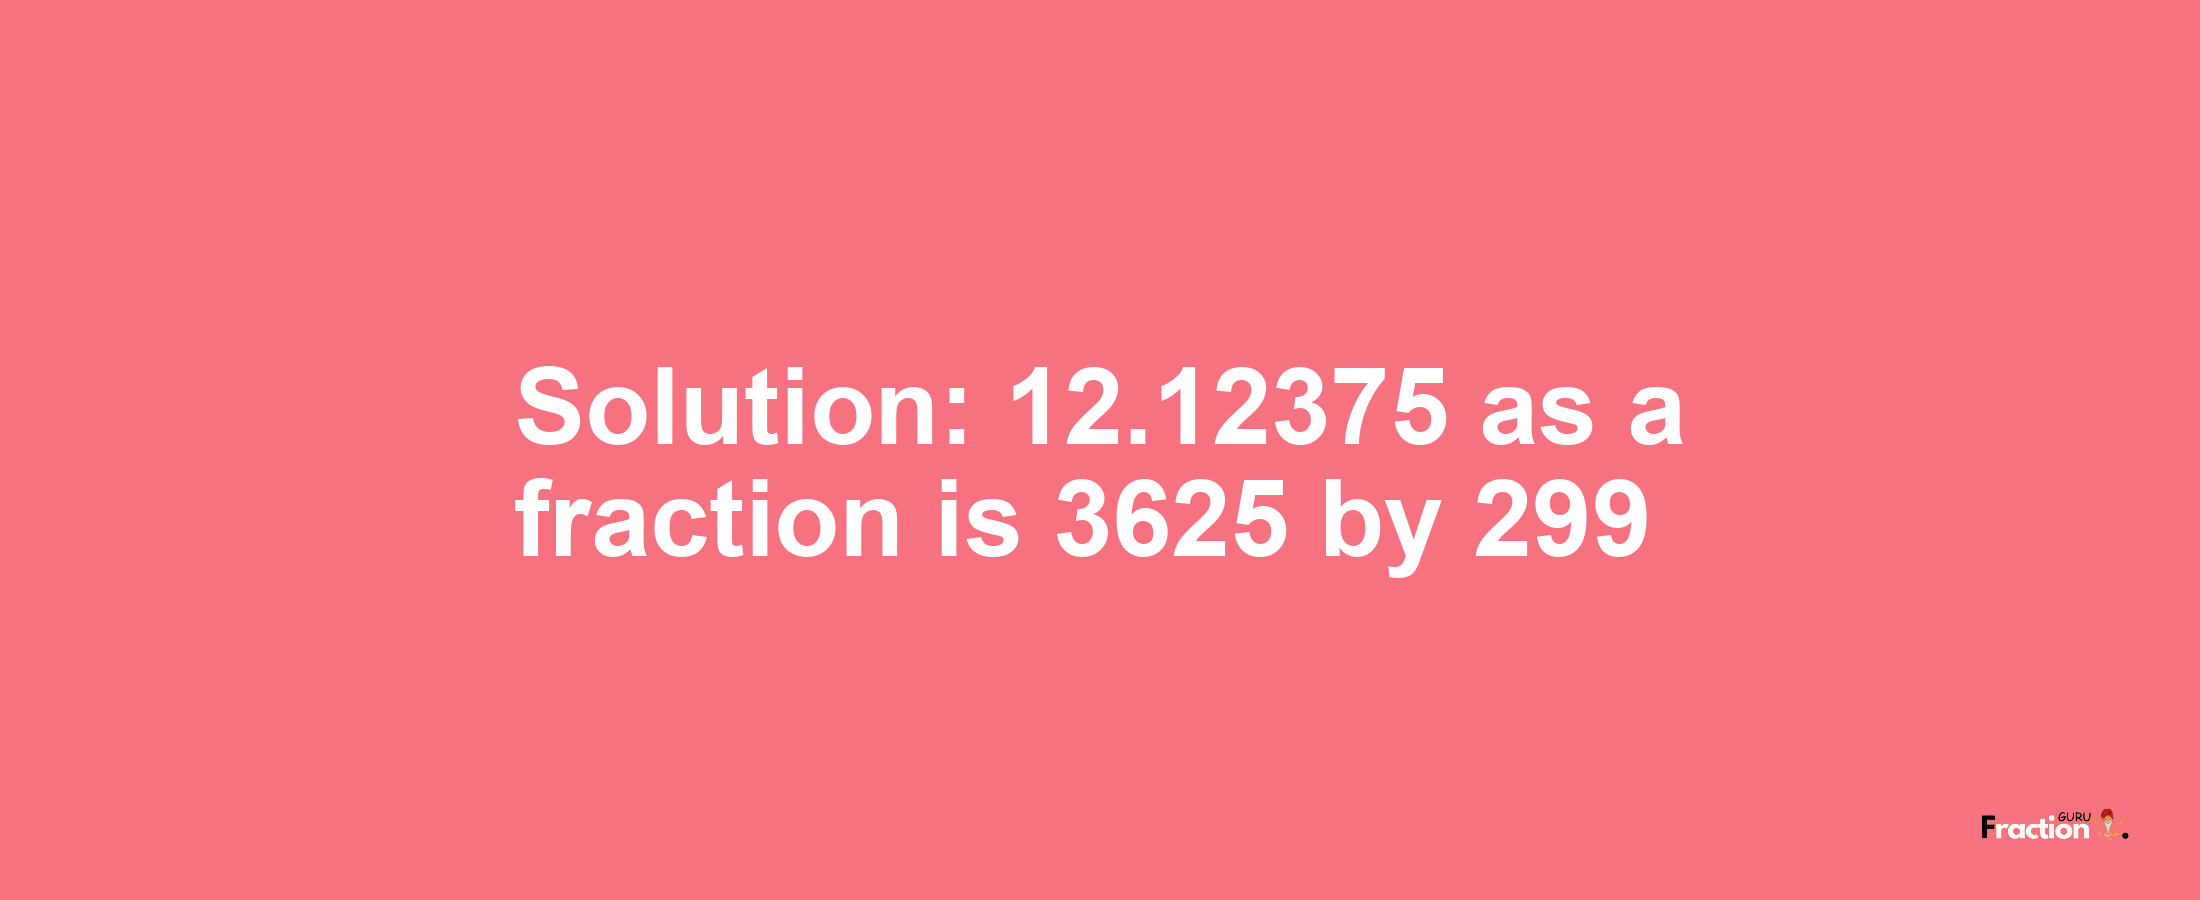 Solution:12.12375 as a fraction is 3625/299